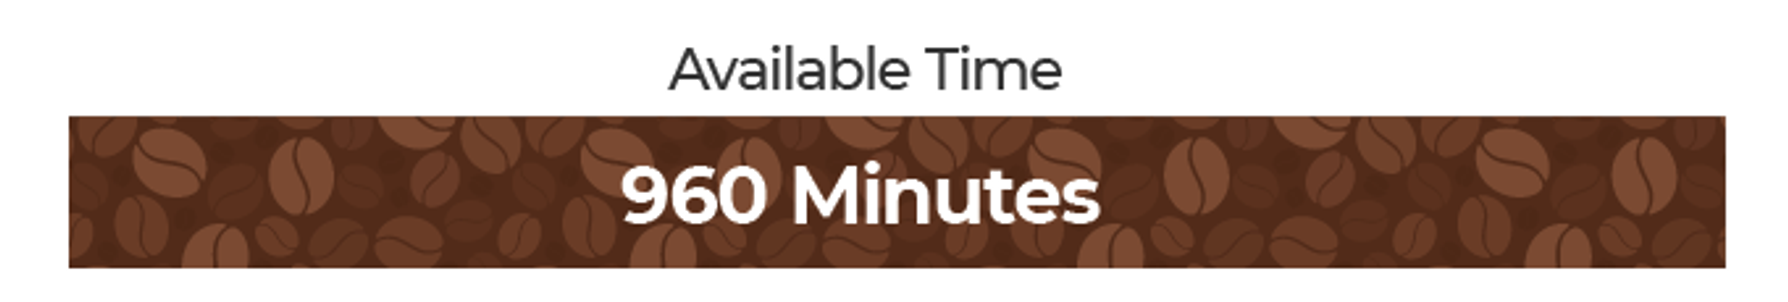 Available Time: 960 Minutes